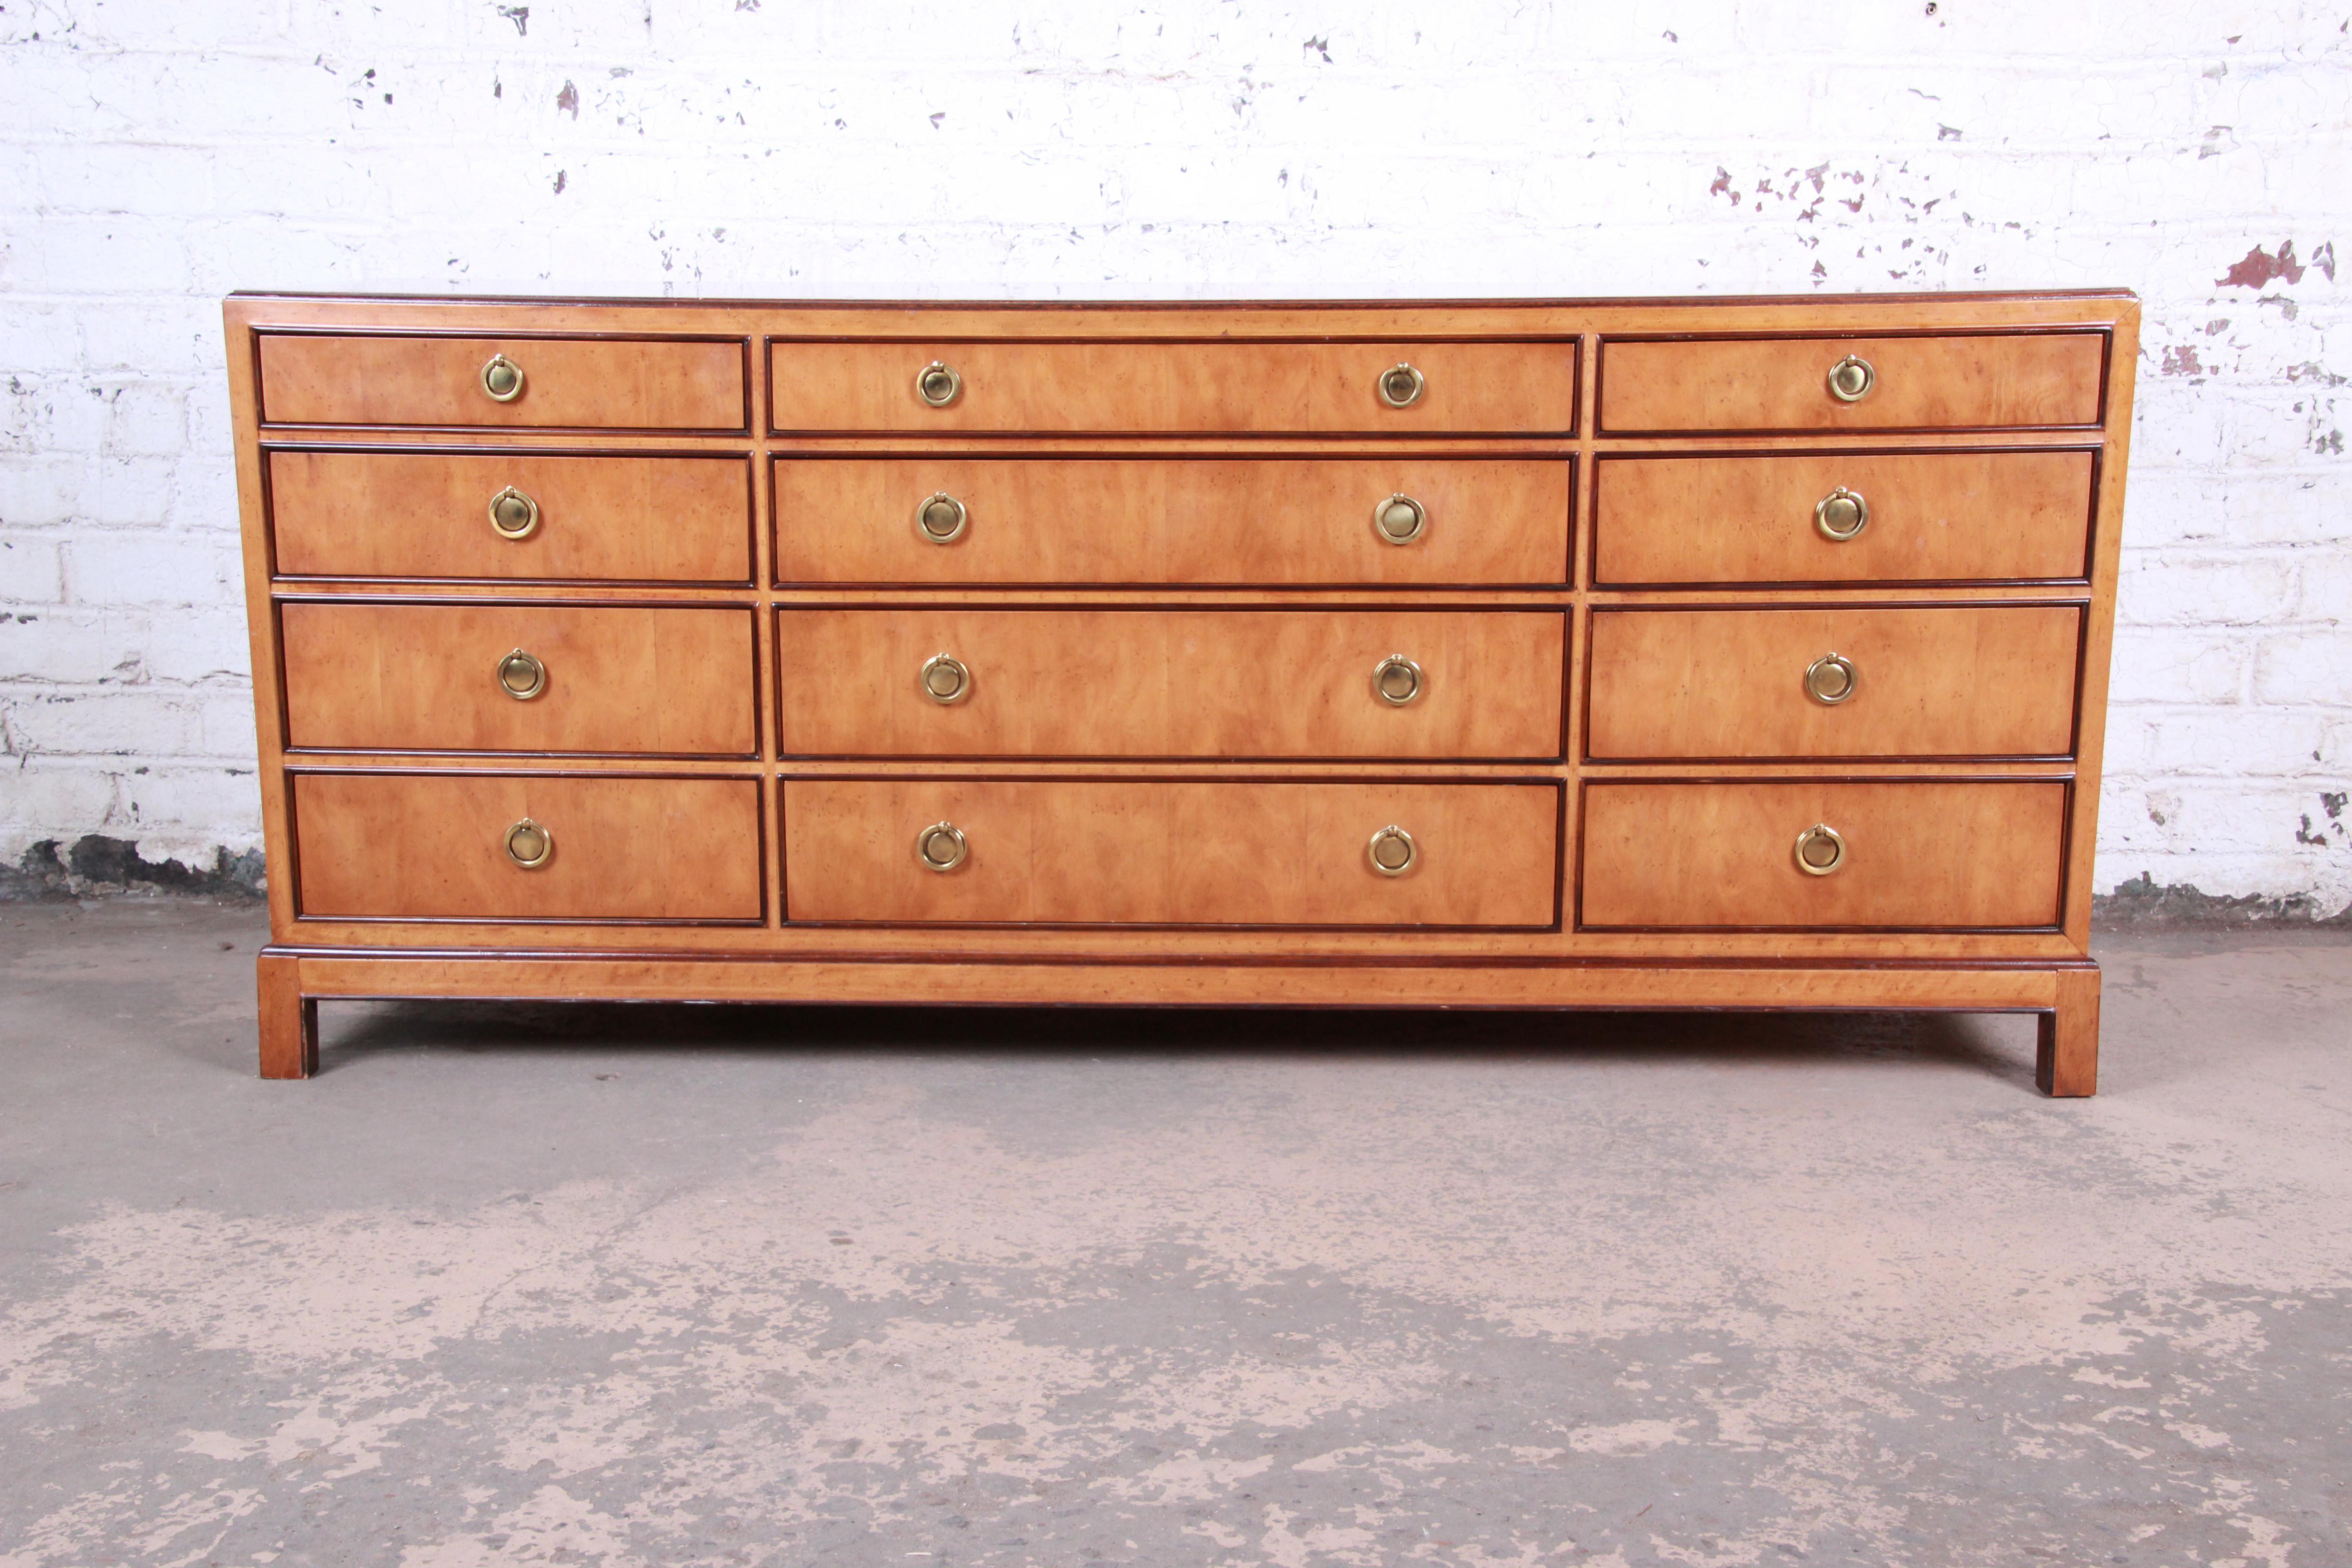 A gorgeous burl wood chinoiserie long dresser or credenza by Drexel Heritage. The dresser features stunning wood grain and clean lines, with a subtle Asian flair. It offers ample storage, with twelve dovetailed drawers each with original brass ring